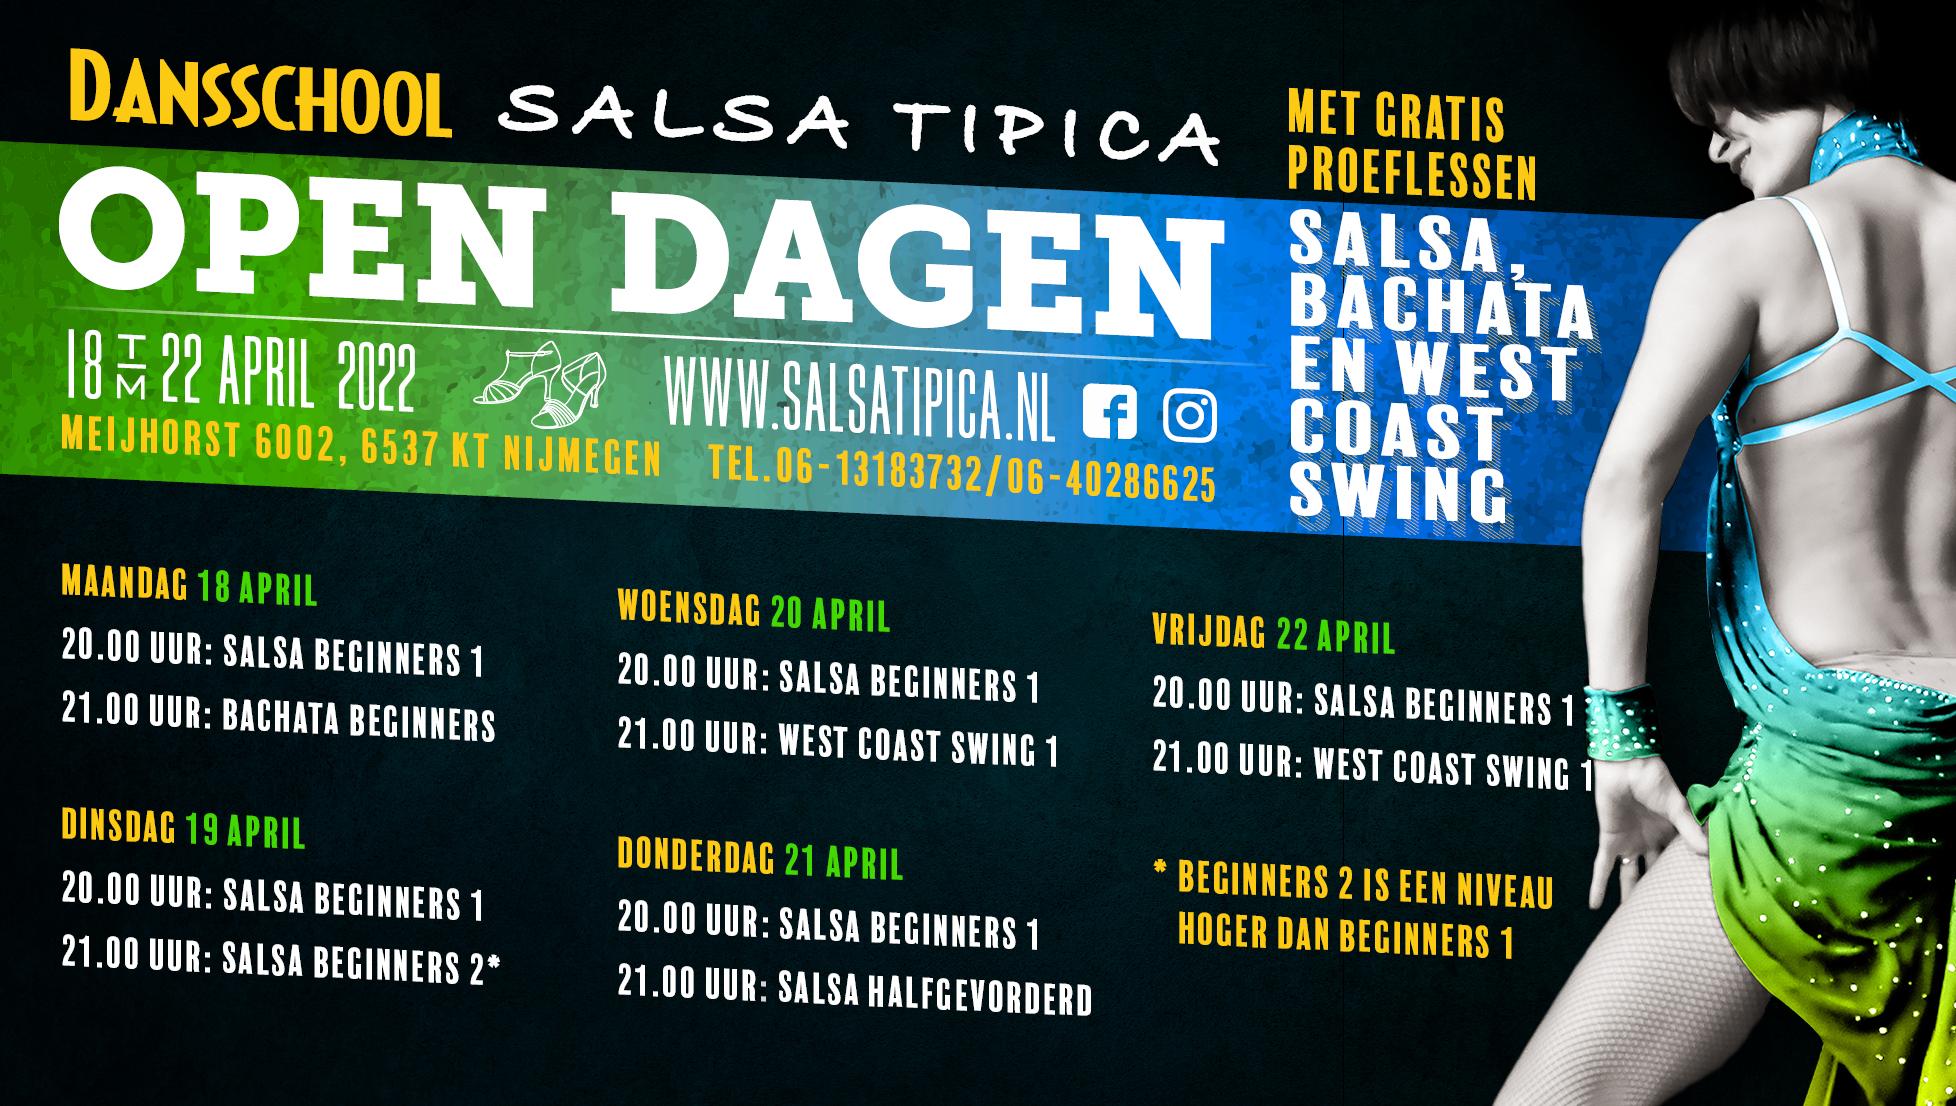 Free trial lessons in April at Salsa Tipica